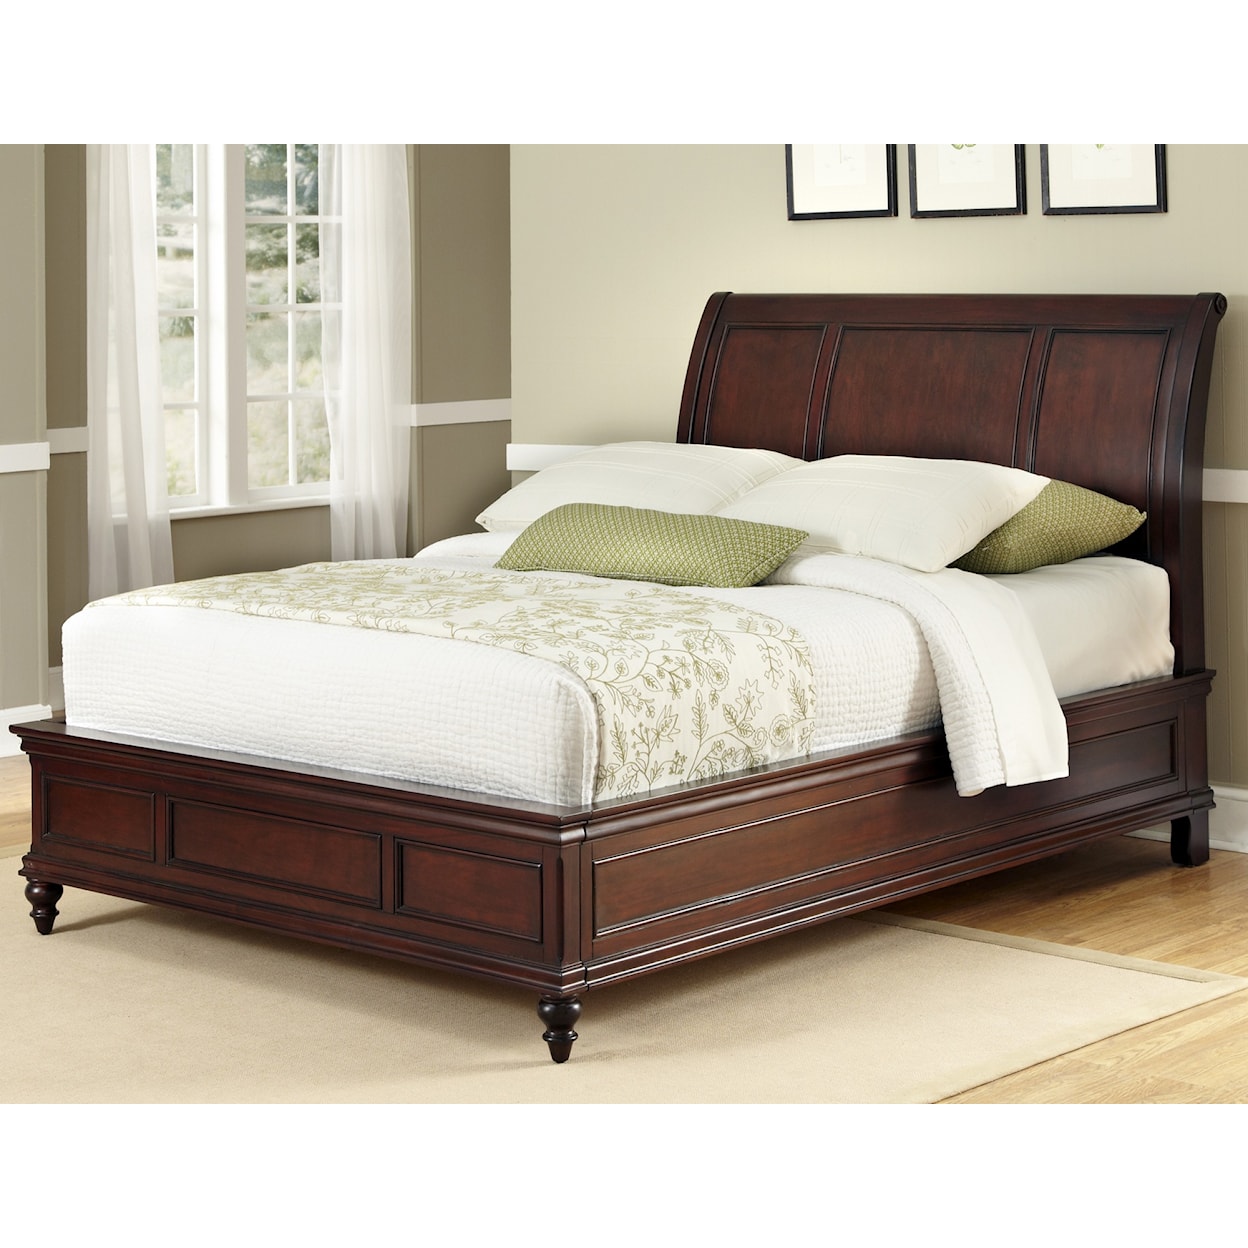 homestyles Lafayette 4PC King Bedroom Group